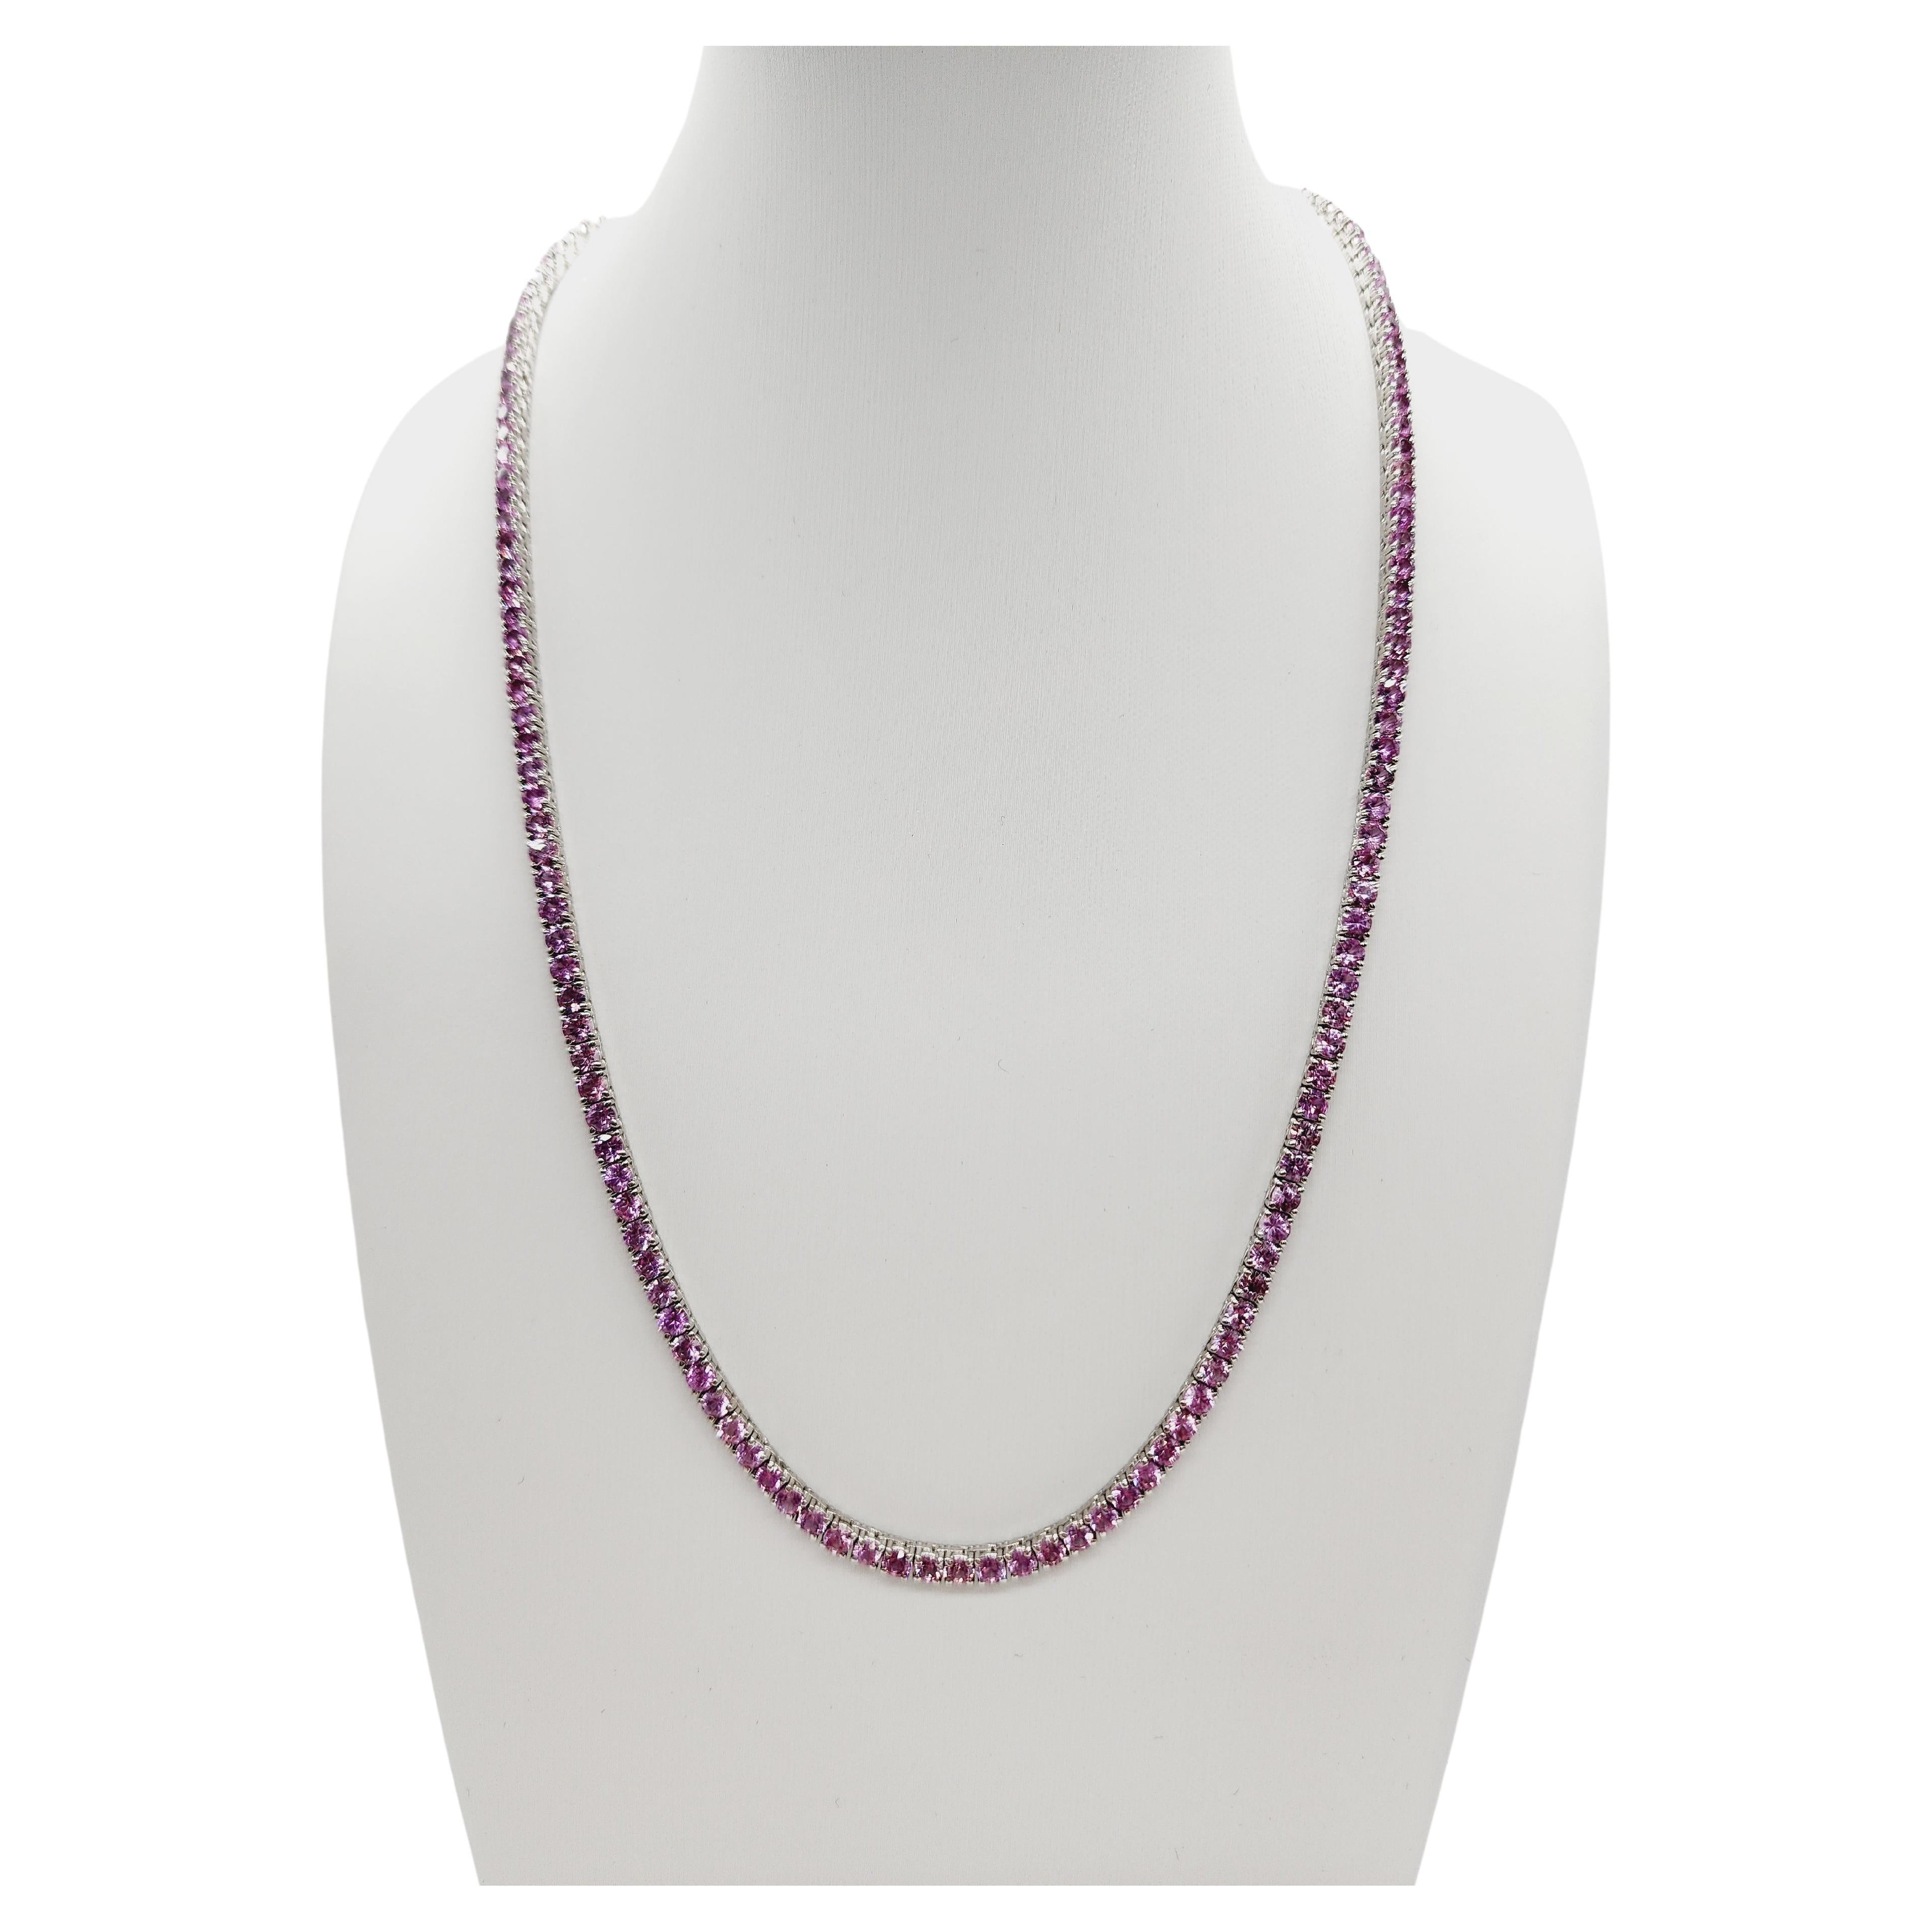 NATURAL PINK SAPPHIRE TENNIS NECKLACE WHITE GOLD 14K
16 INCH. 3.2 MM WIDE.

All sapphire are natural, not treated.